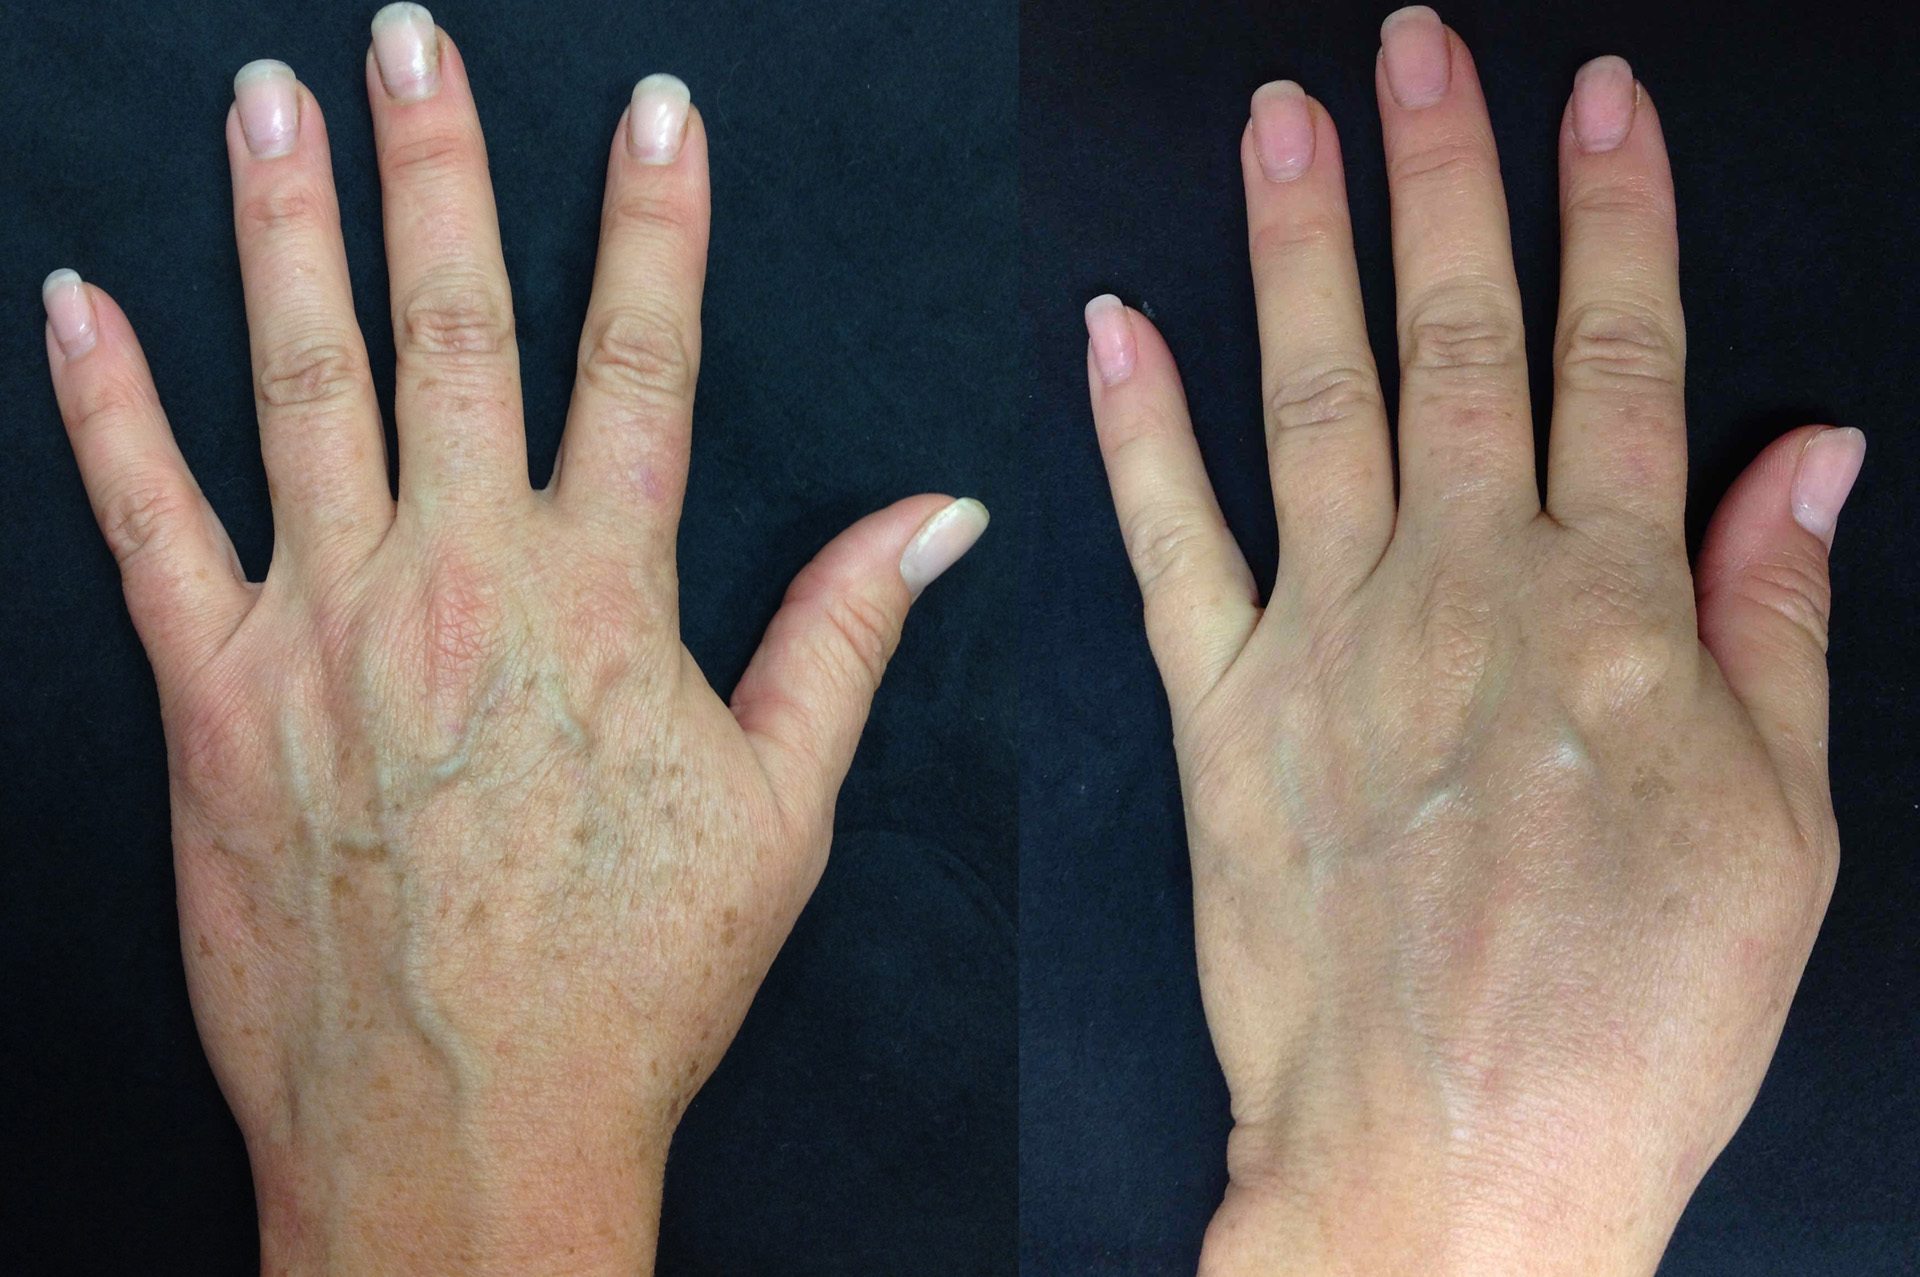 Before and after close-up on hands